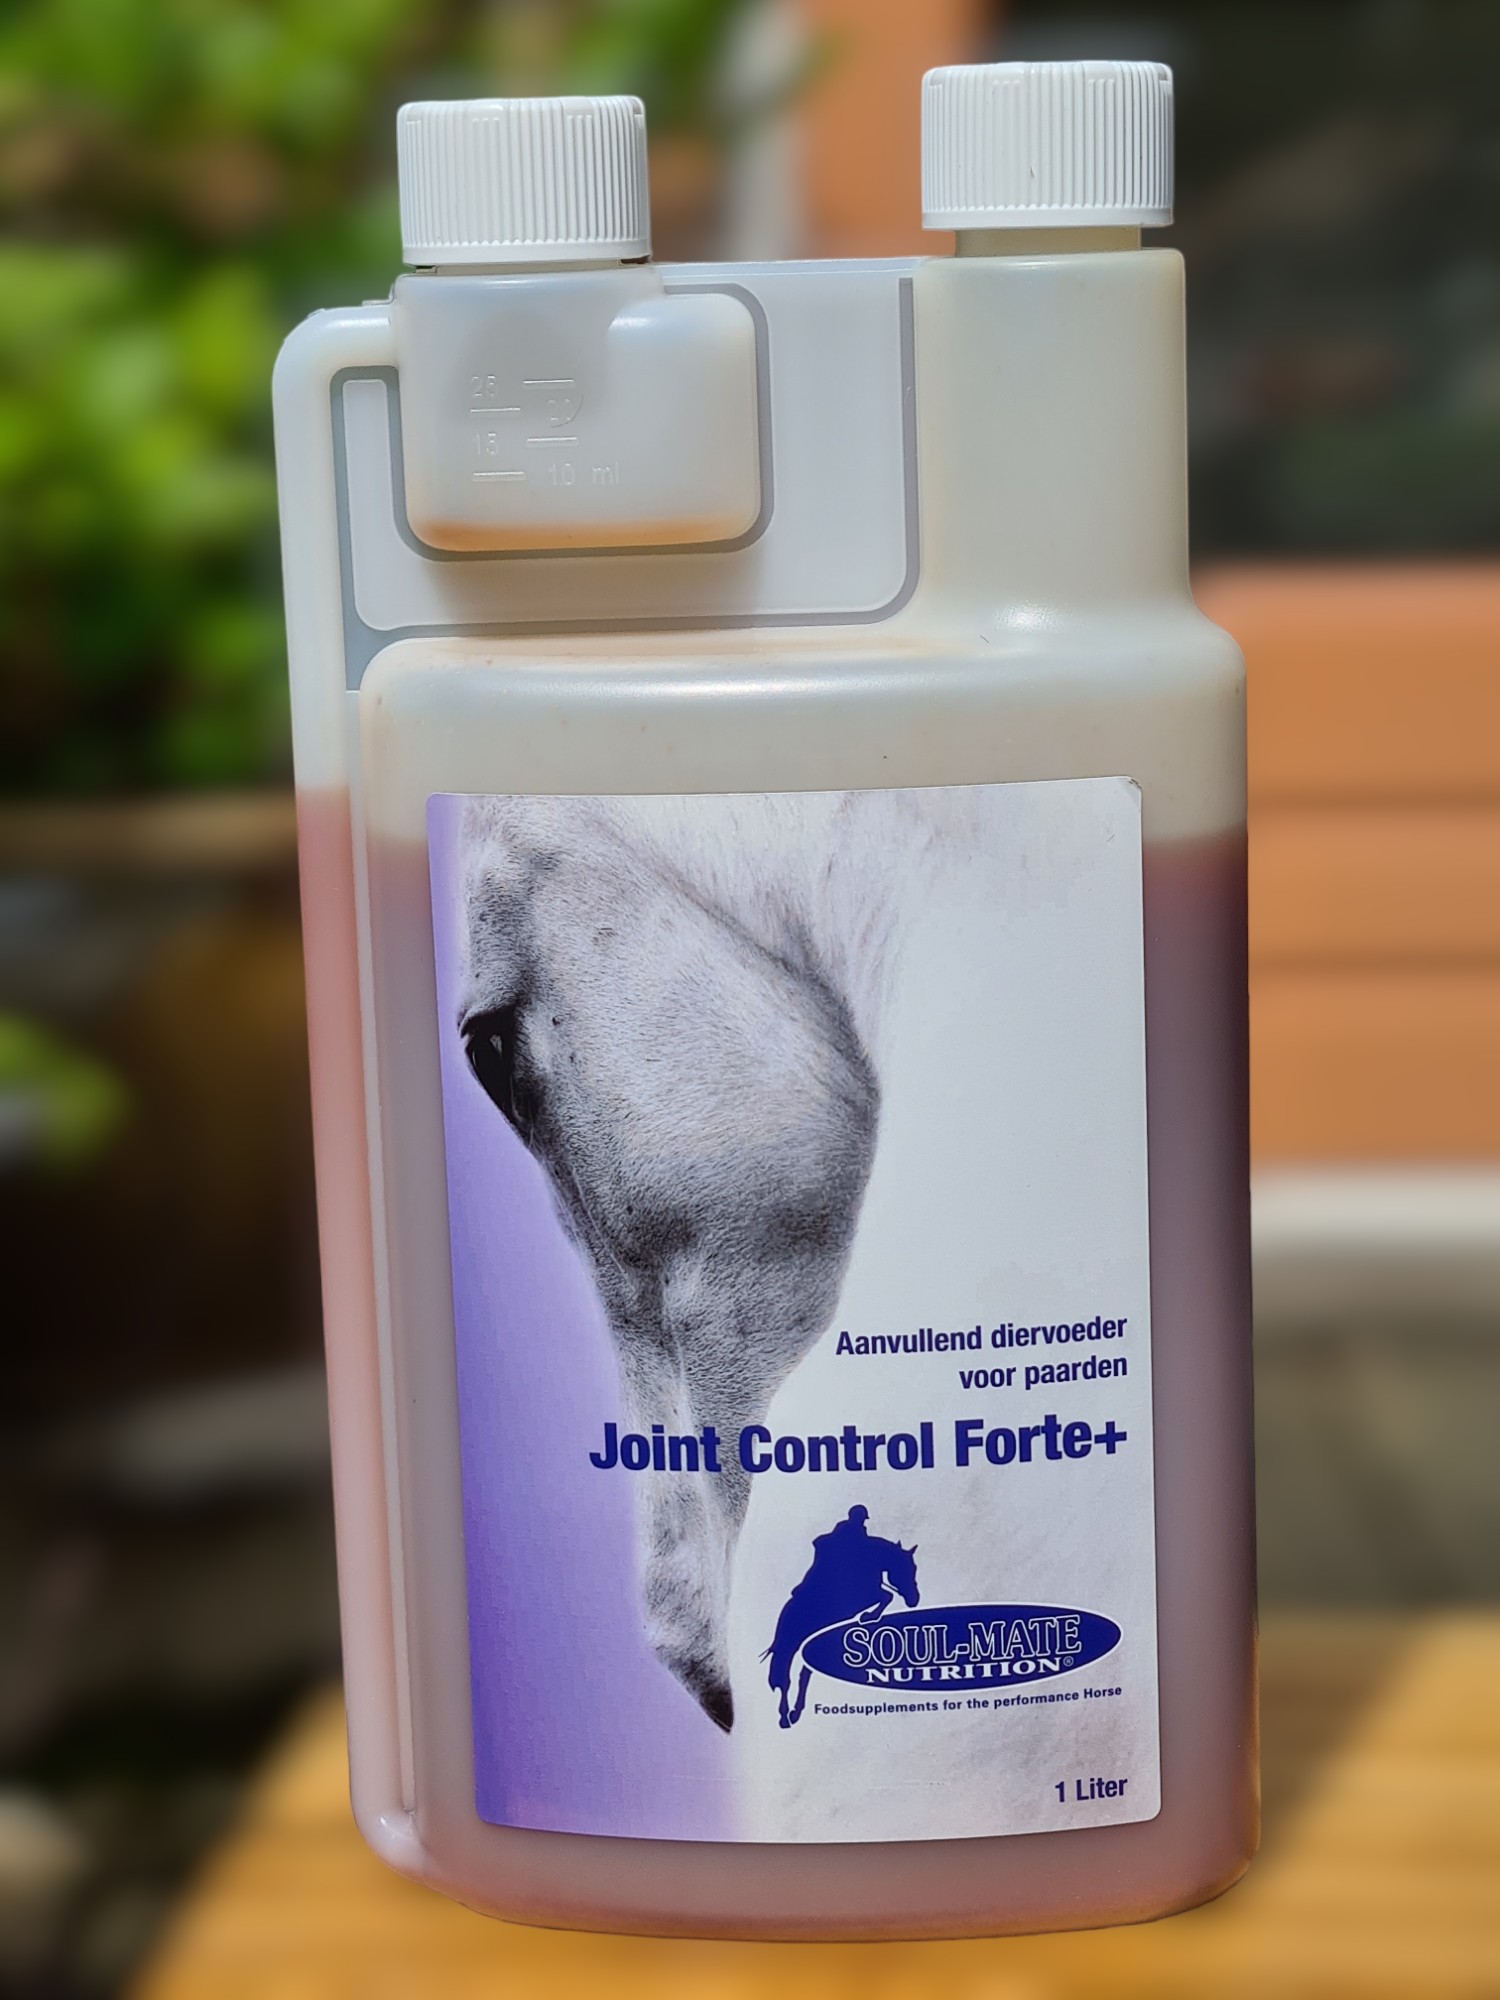 joint-control-forte-plus